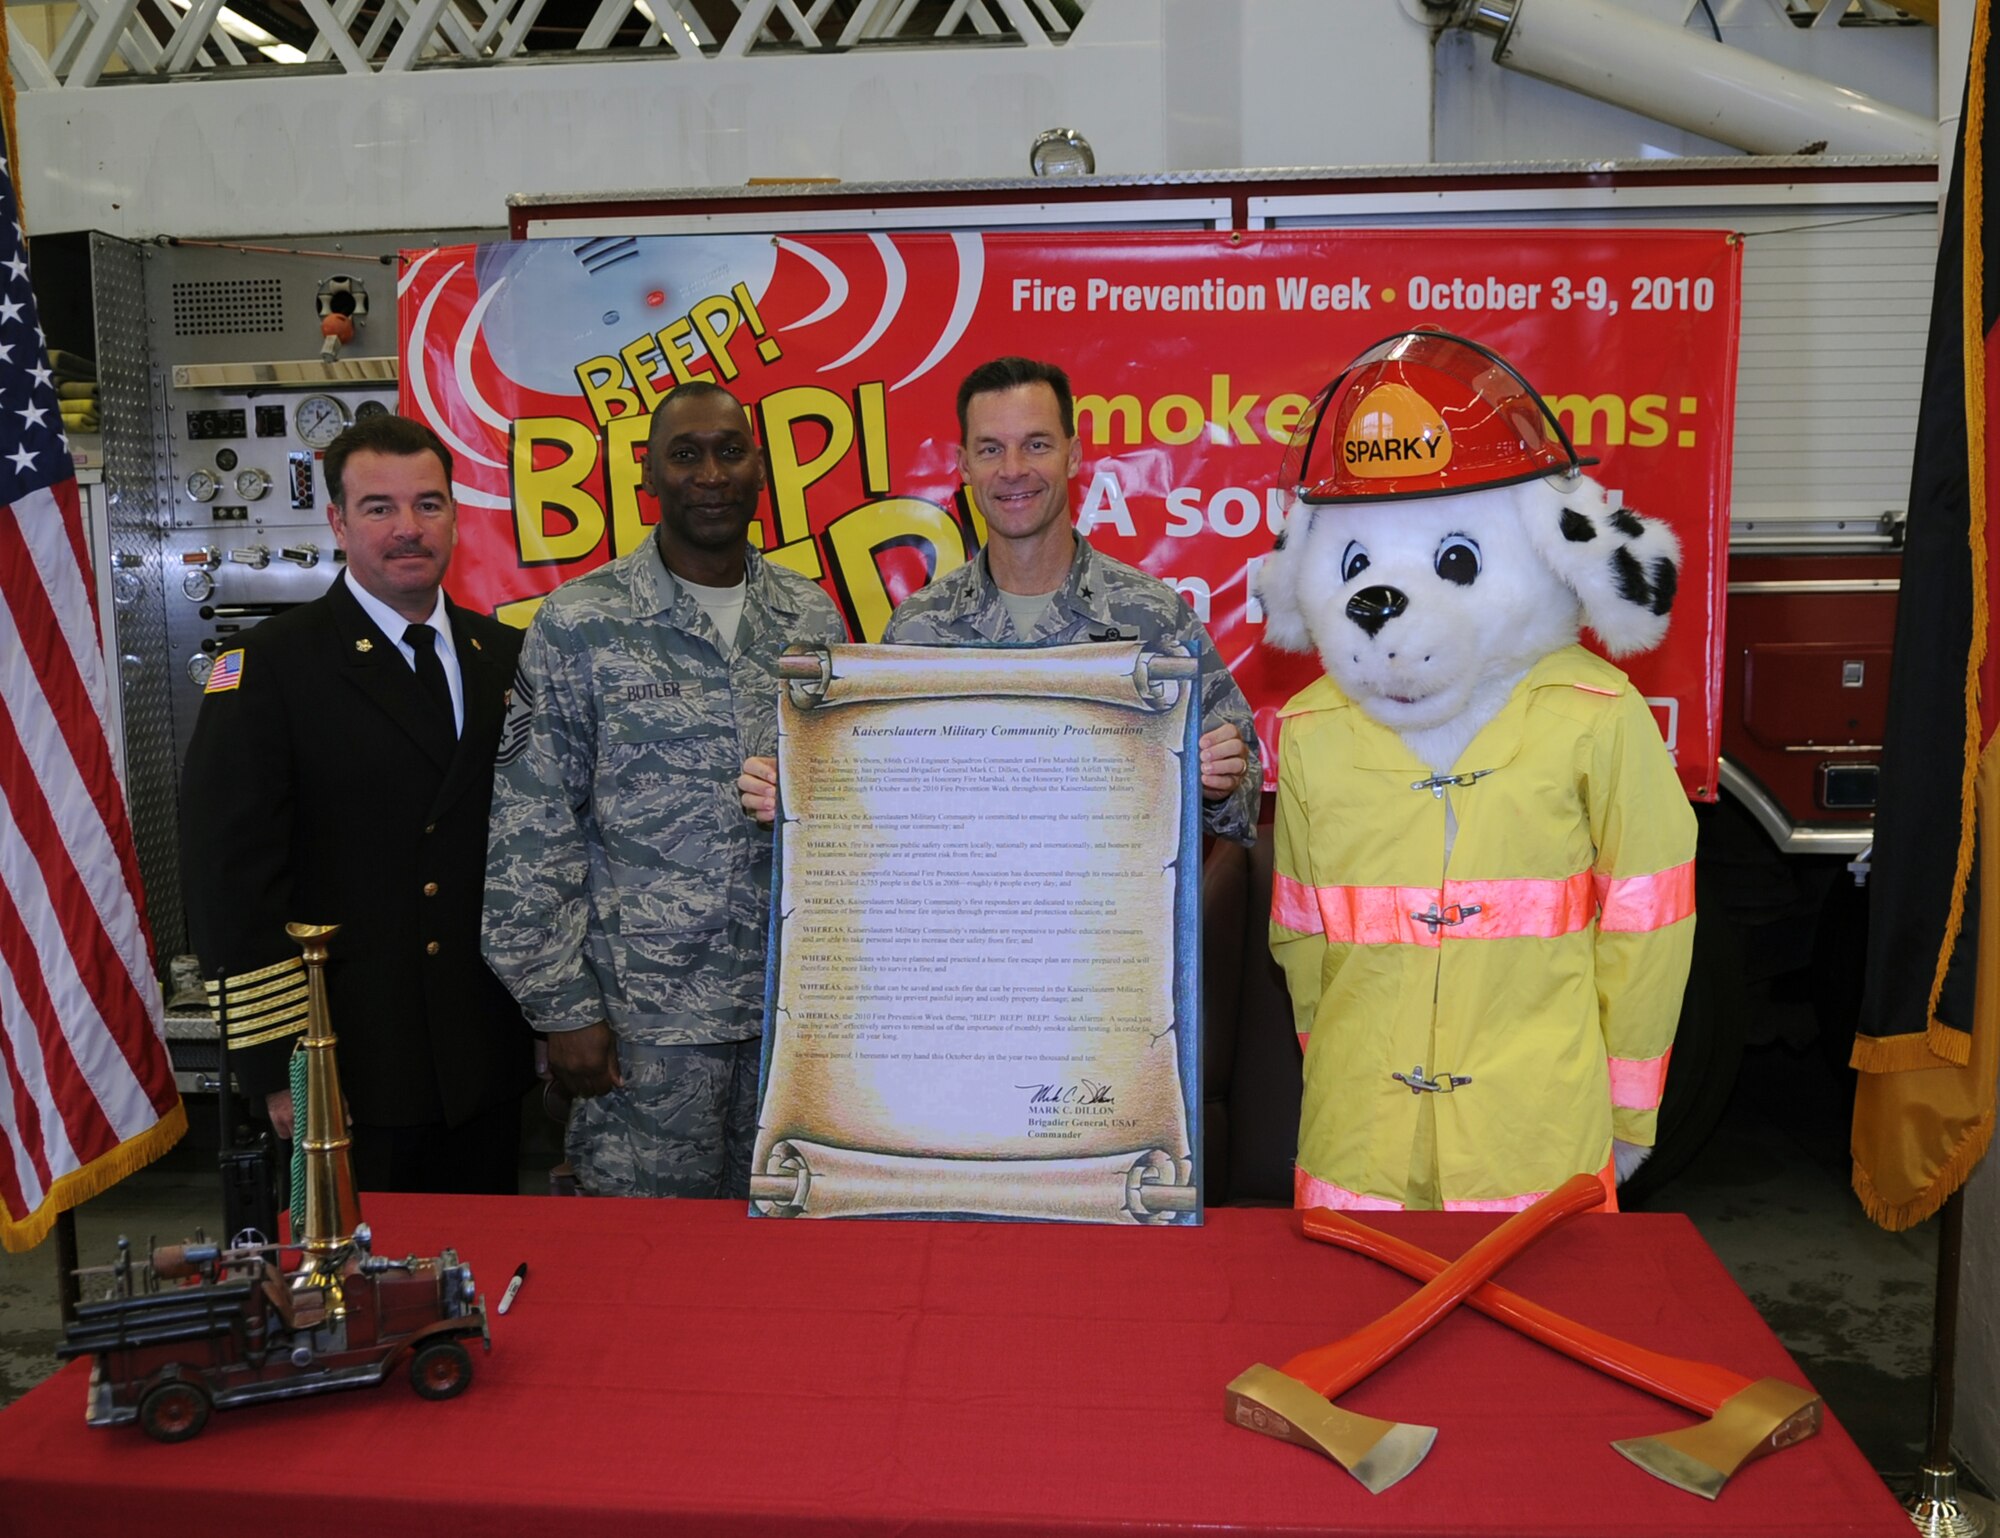 U.S. Air Force Brig. Gen. Mark Dillon, 86th Airlift Wing commander, poses for a photo with Randall Marshall, 886th Civil Engineer Squadron fire chief, Chief Master Sgt. Vernon Butler, 86th Airlift Wing command chief, and Sparky the Fire Dog, after signing the Kaiserslautern Military Community Proclamation, Ramstein Air Base, Germany, Sept. 10, 2010. The signing of the proclamation was to start National Fire Prevention Week, Oct 3-9, with the first week focusing on, "Beep! Beep! Beep! Smoke Alarm; a sound you can live with". (U.S. Air Force photo by Senior Airman Caleb Pierce)